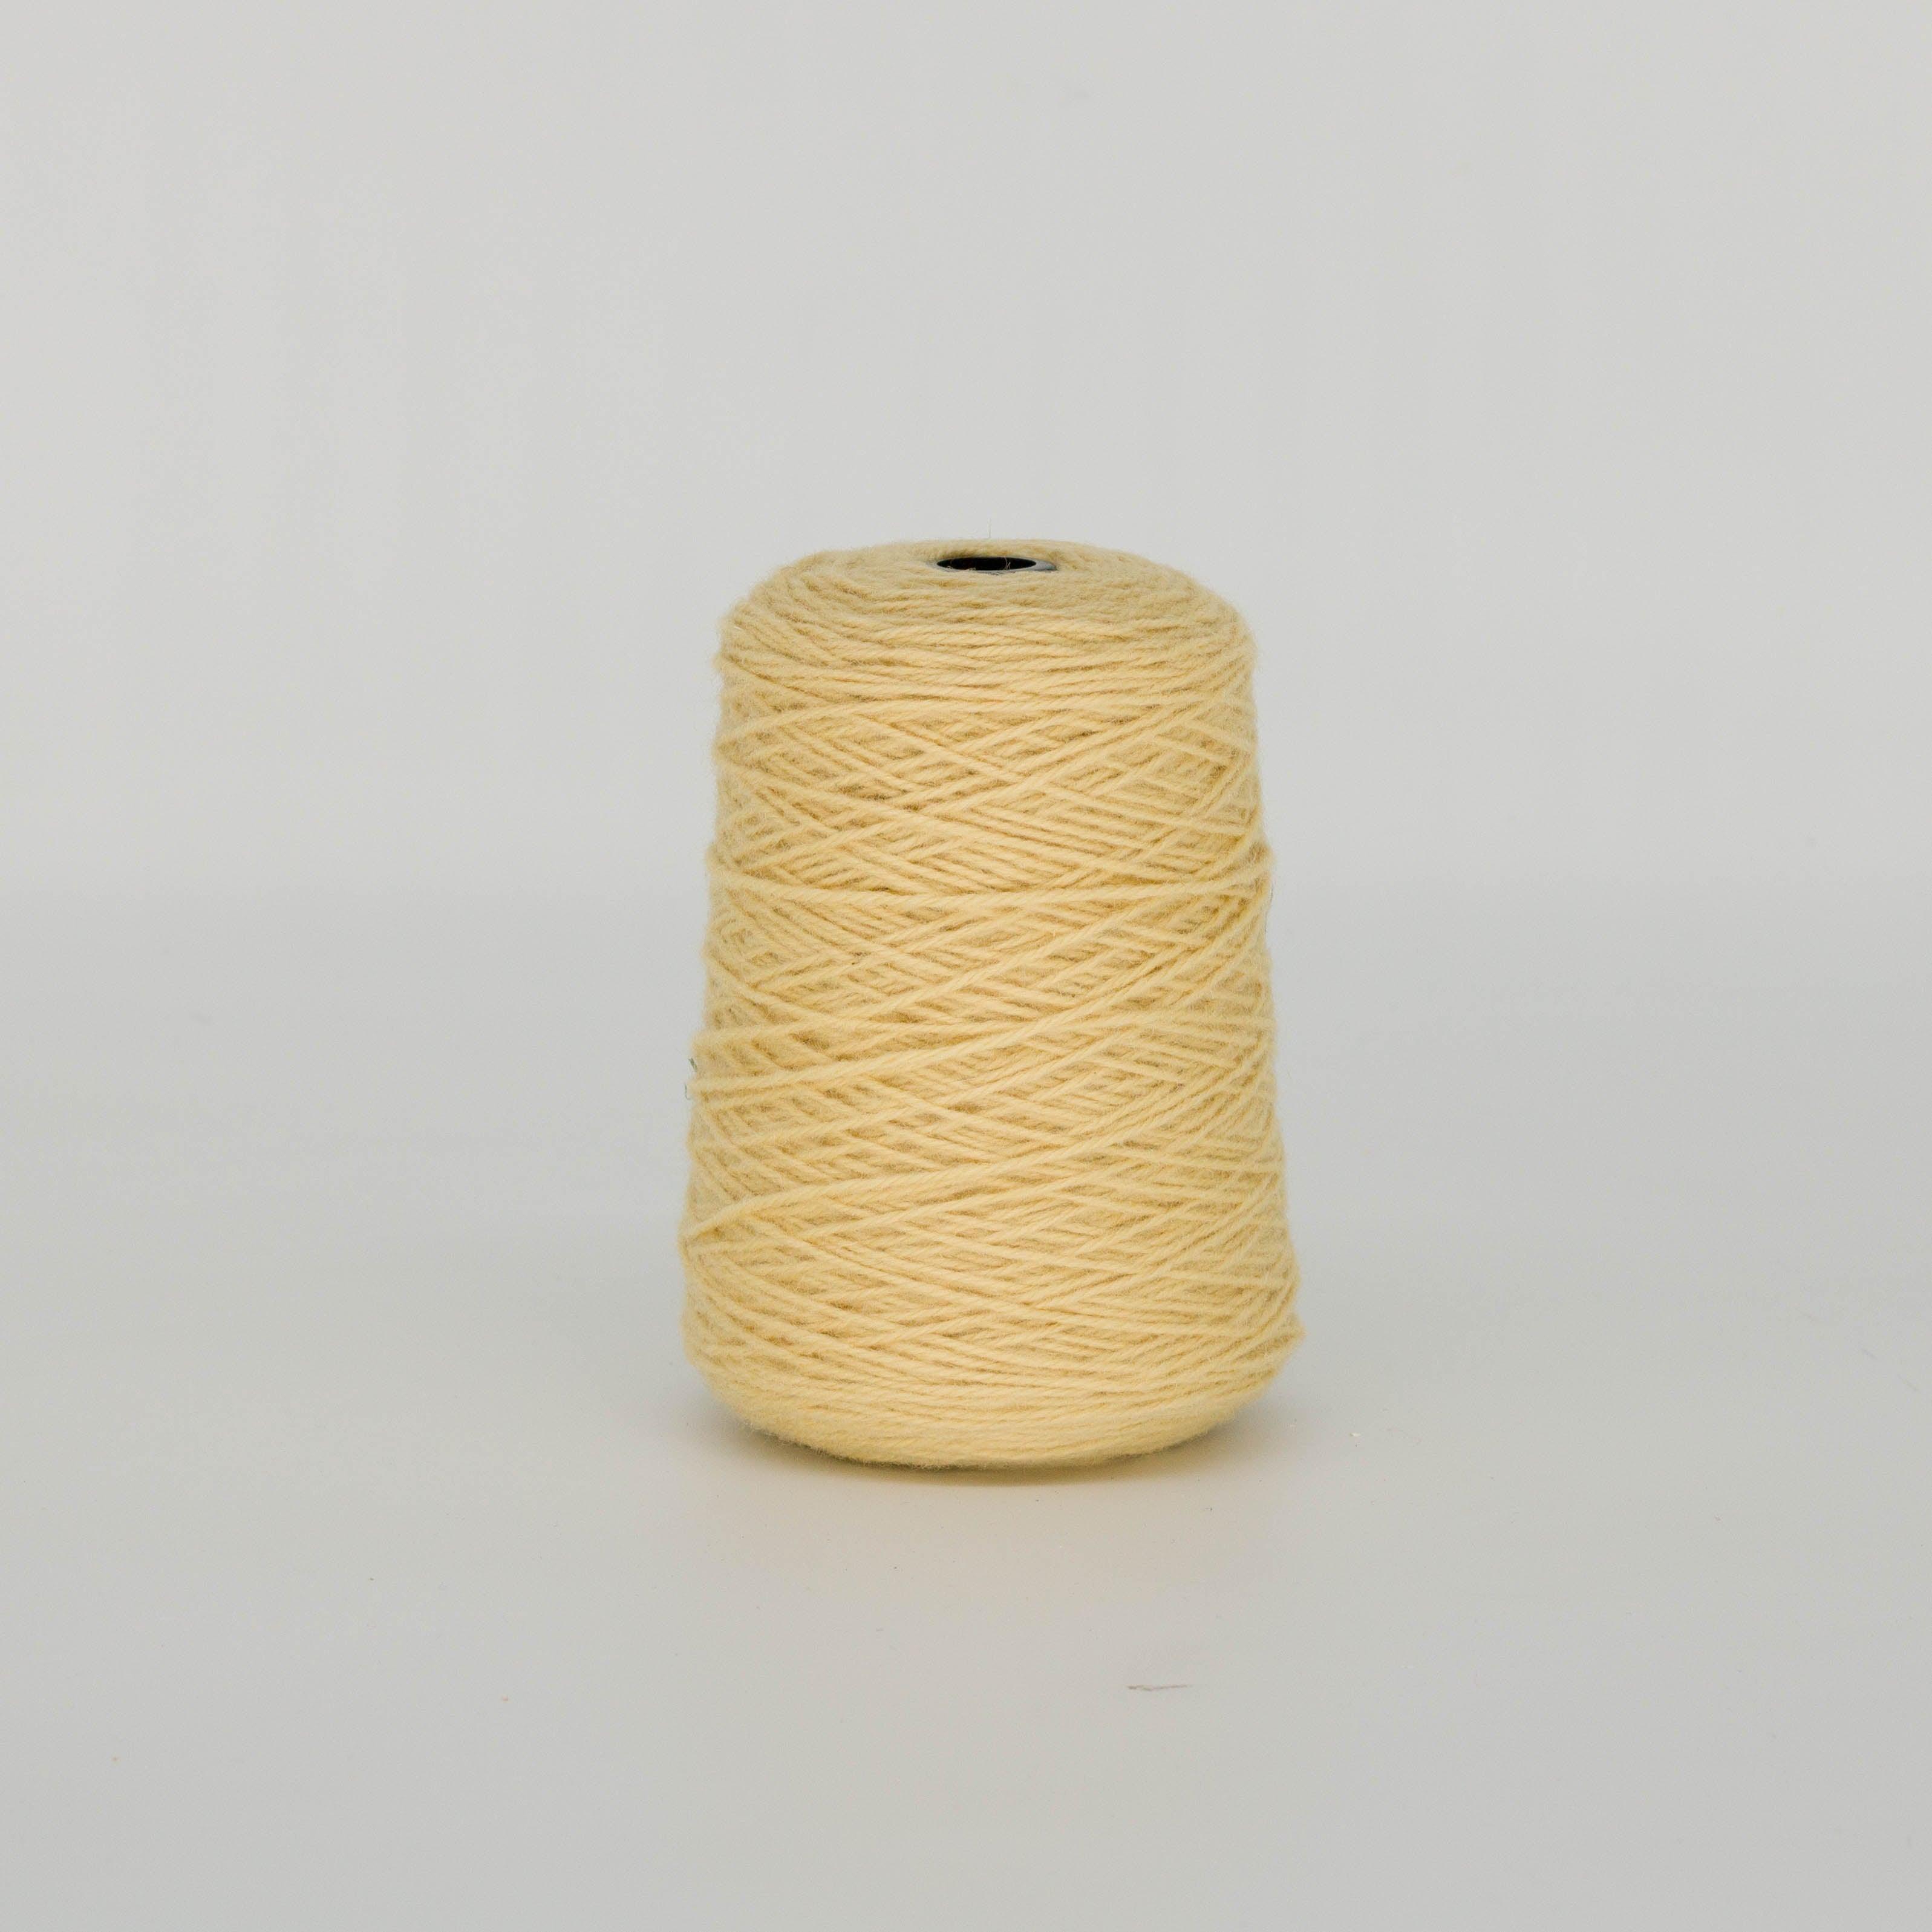 Light yellow / butter 100% Wool Tufting Yarn On Cone (429) - Tuftingshop